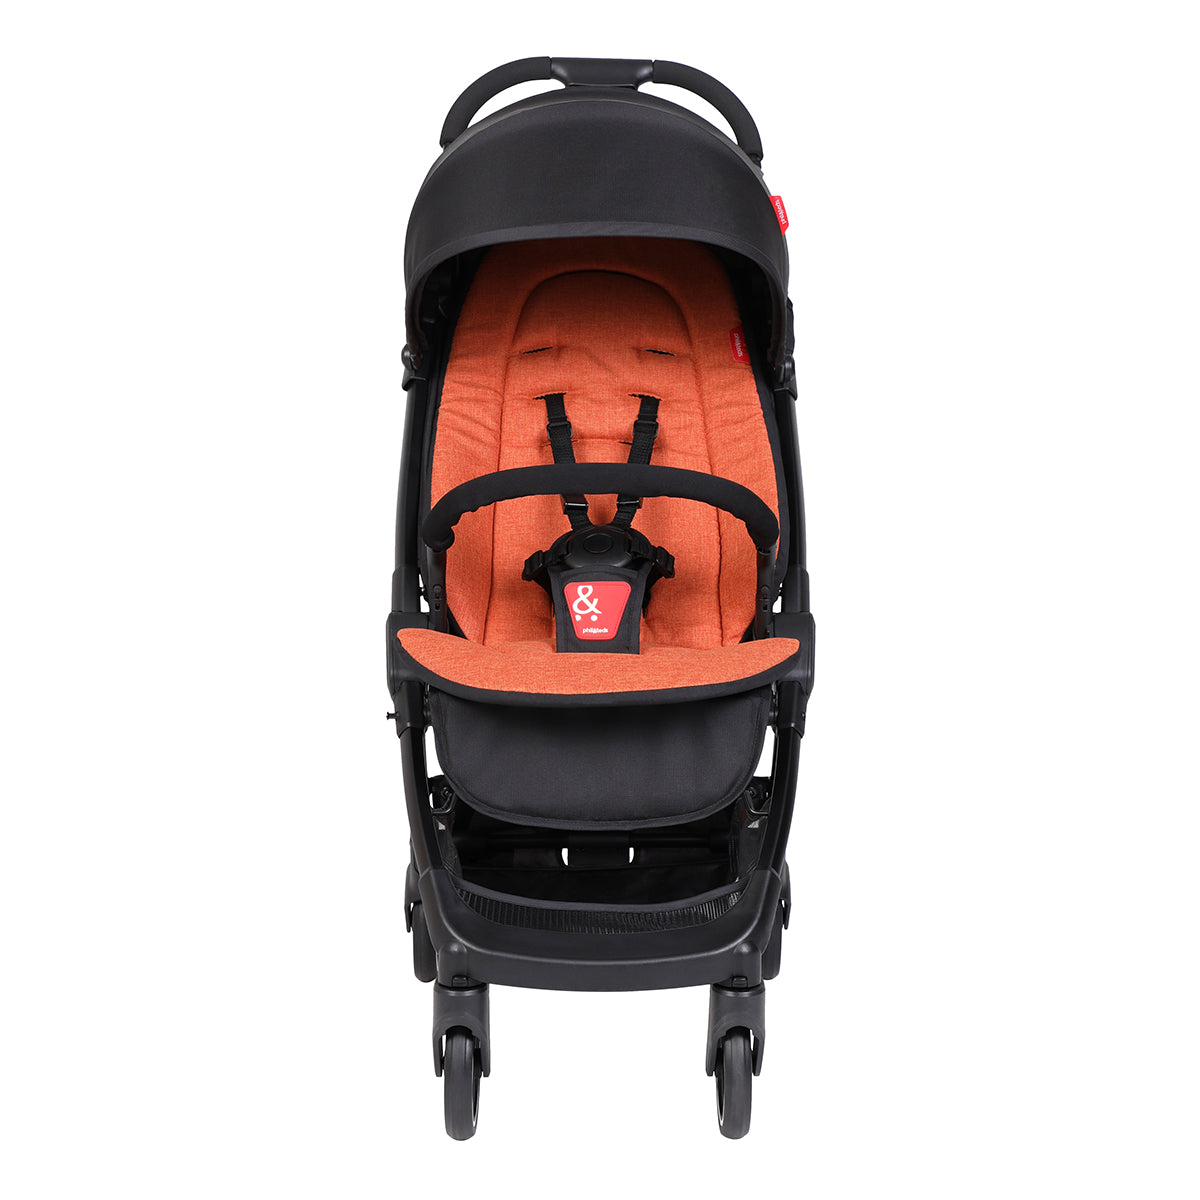 go™ 2020+ compact umbrella stroller with rust coloured liner from front angle_rust